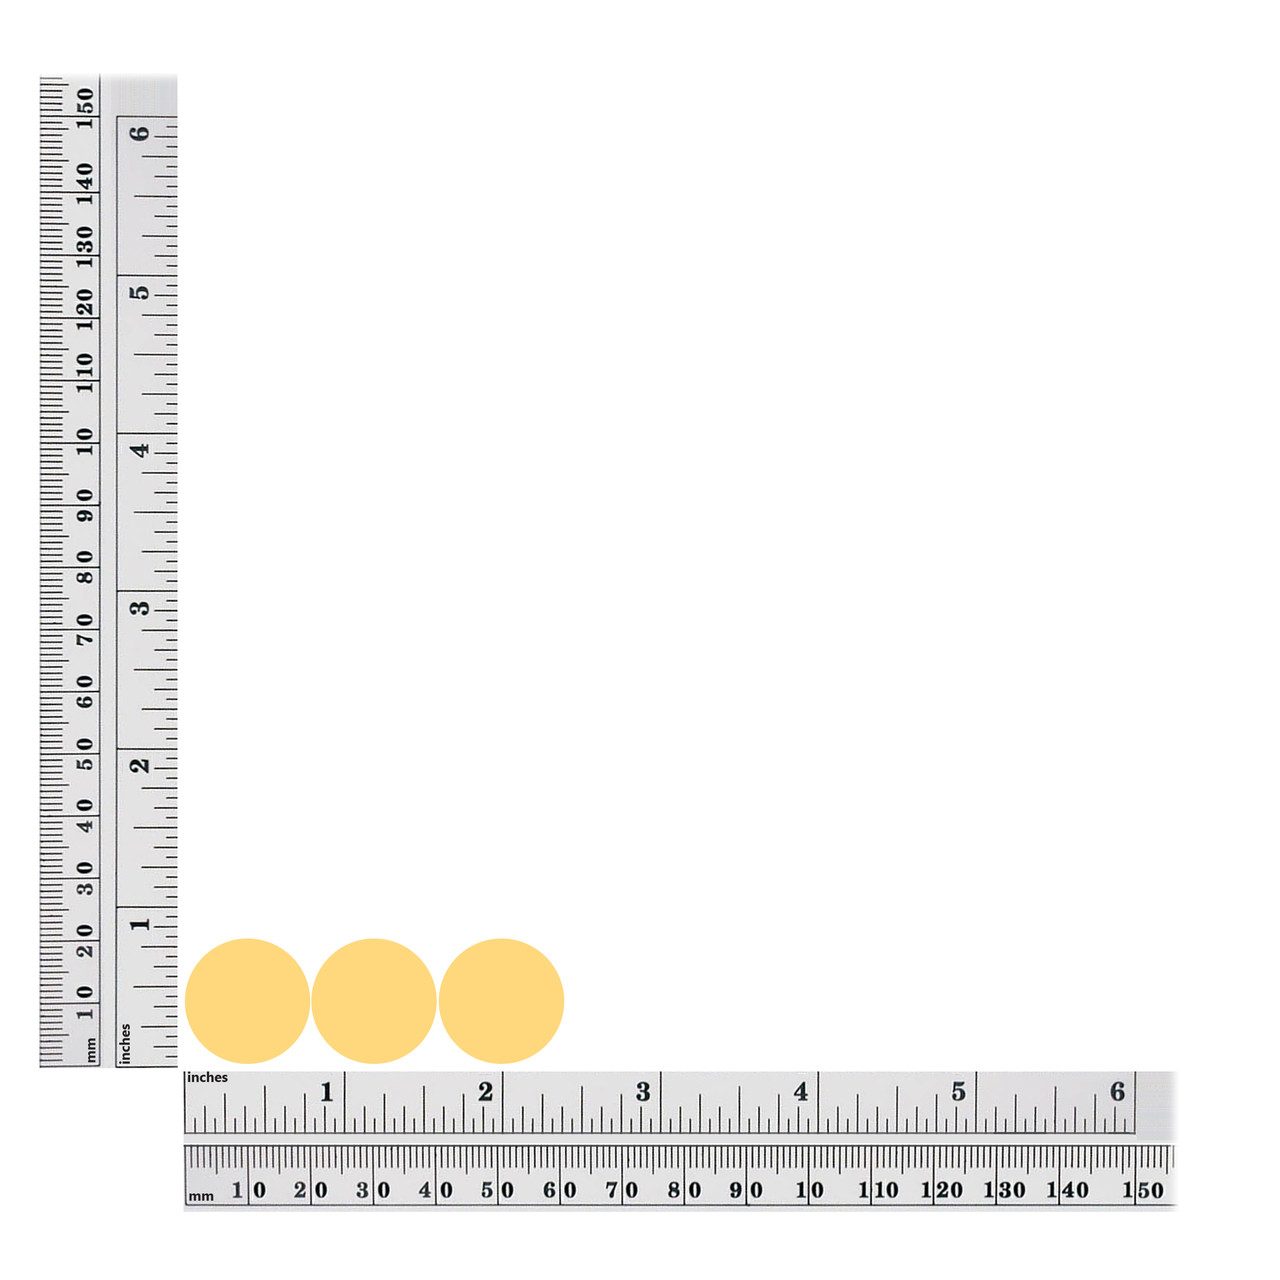 20mm cup sequin size chart